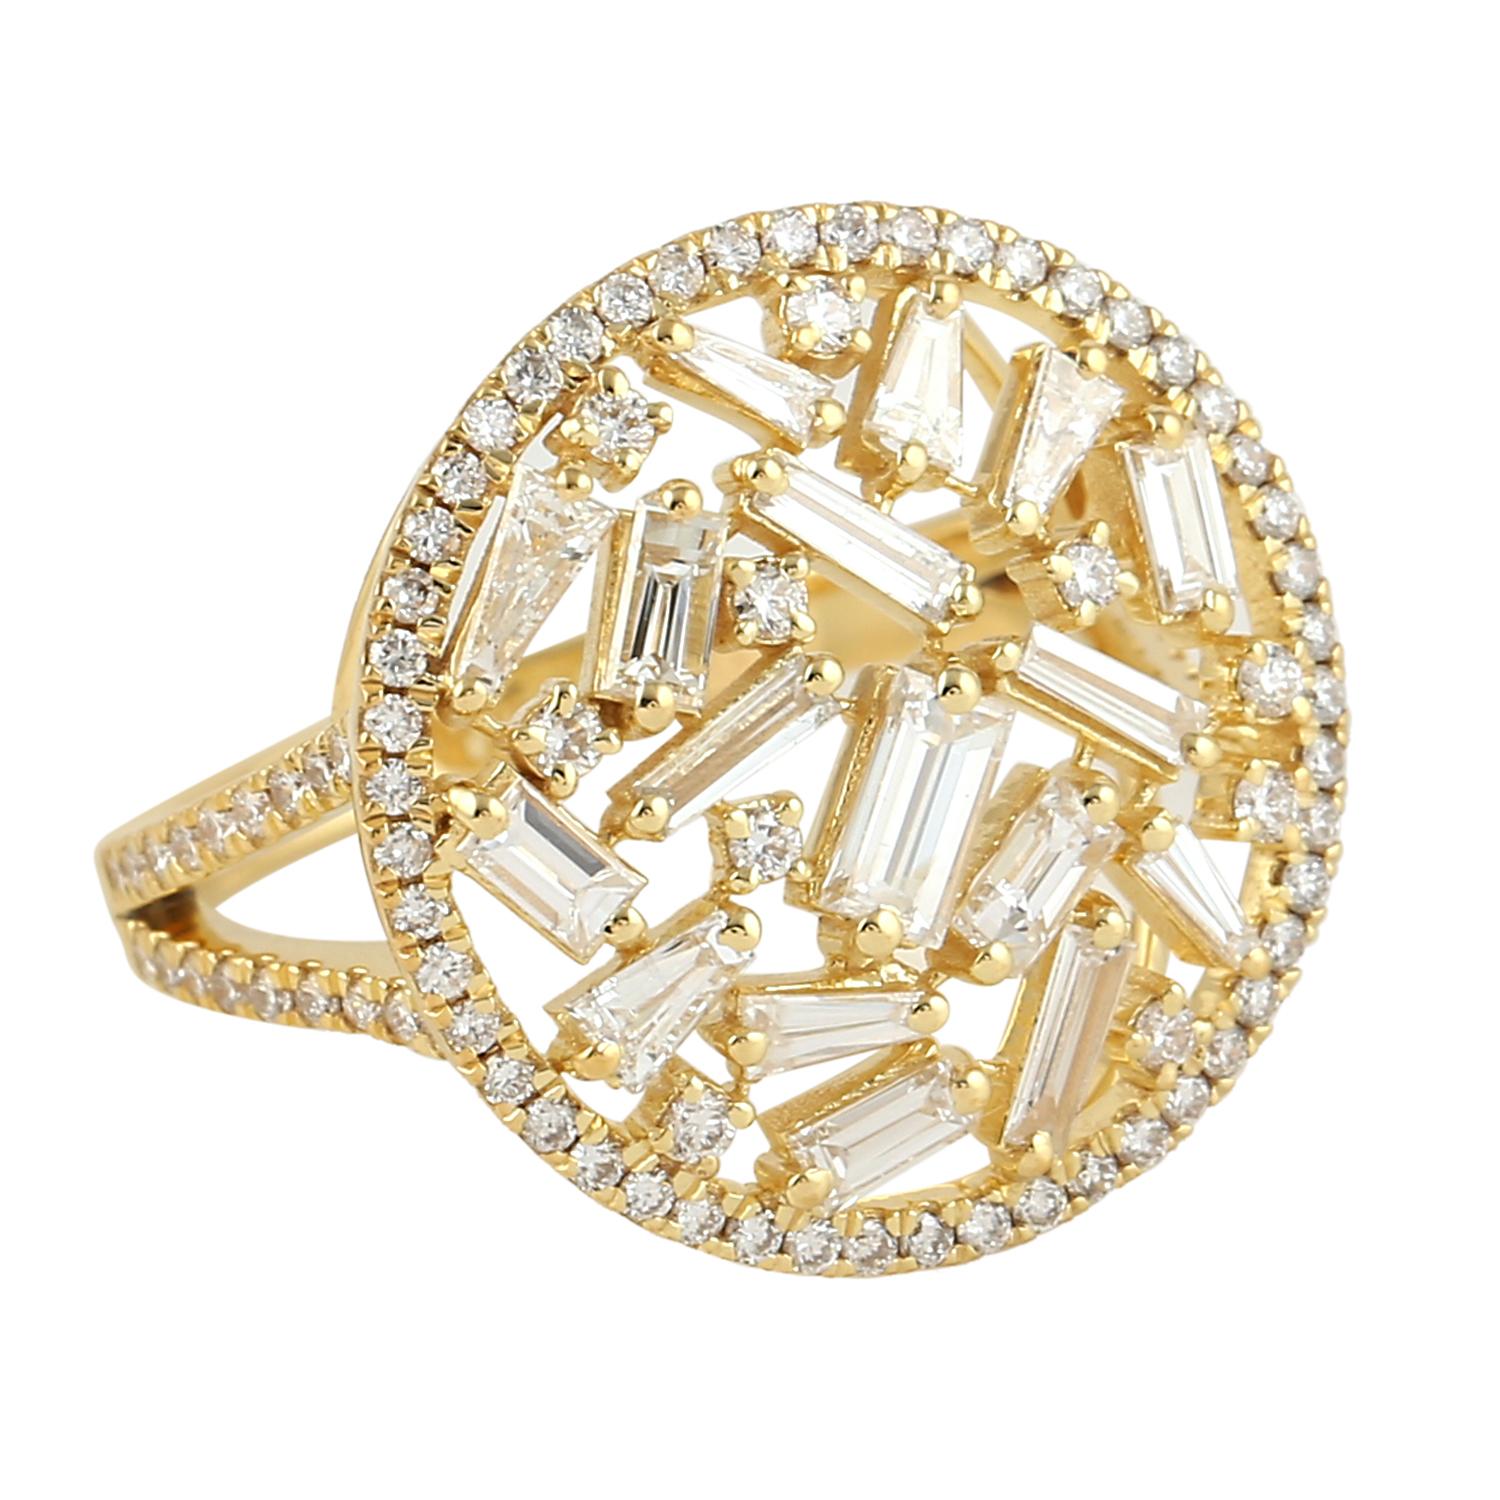 Art Deco Baguette Diamonds Ring Made In 18k Yellow Gold For Sale